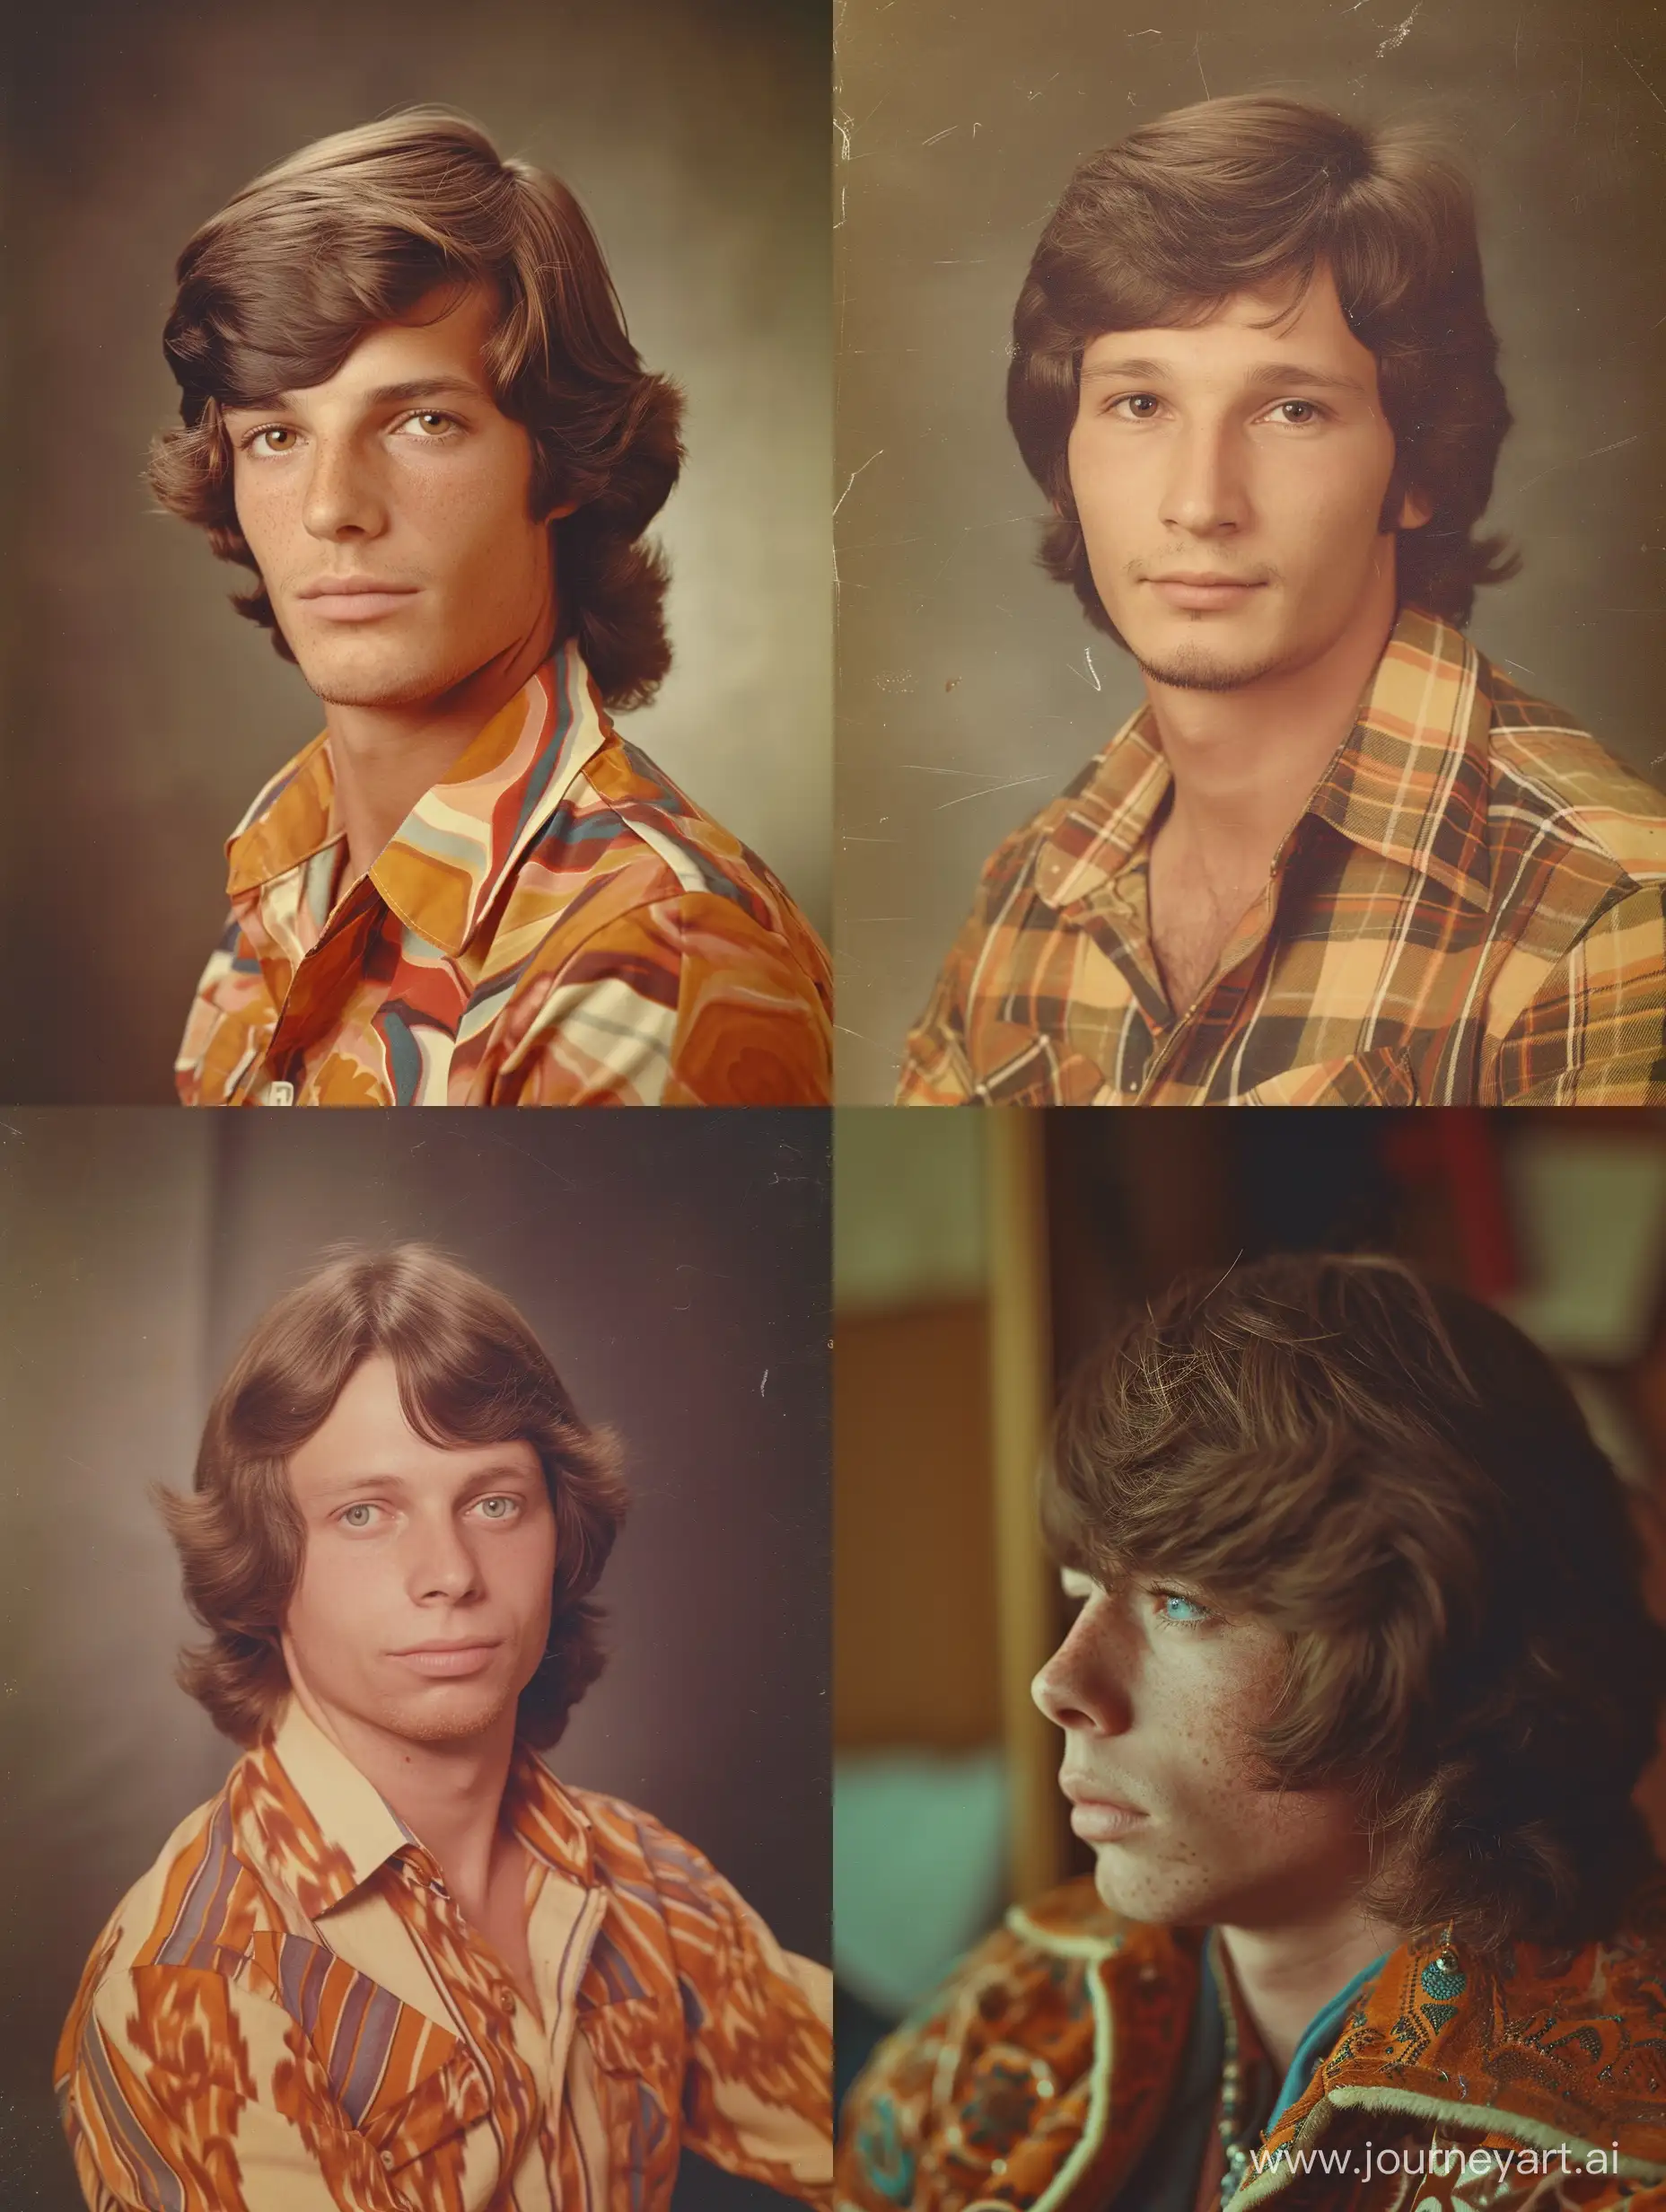 vintage 70s candid photo of a man, __70s/men/70s_types_men__ type, __70s/colors/70s_realhairc__ __70s/men/70s_men_hair__, wearing __70s/men/70s_daily_men_clothing__, (__70s/Locations/70s_shops__), soft lighting, high quality, film grain, Fujifilm XT3 <lora:add_detail:0.8> <lora:LowRA:0.8>

